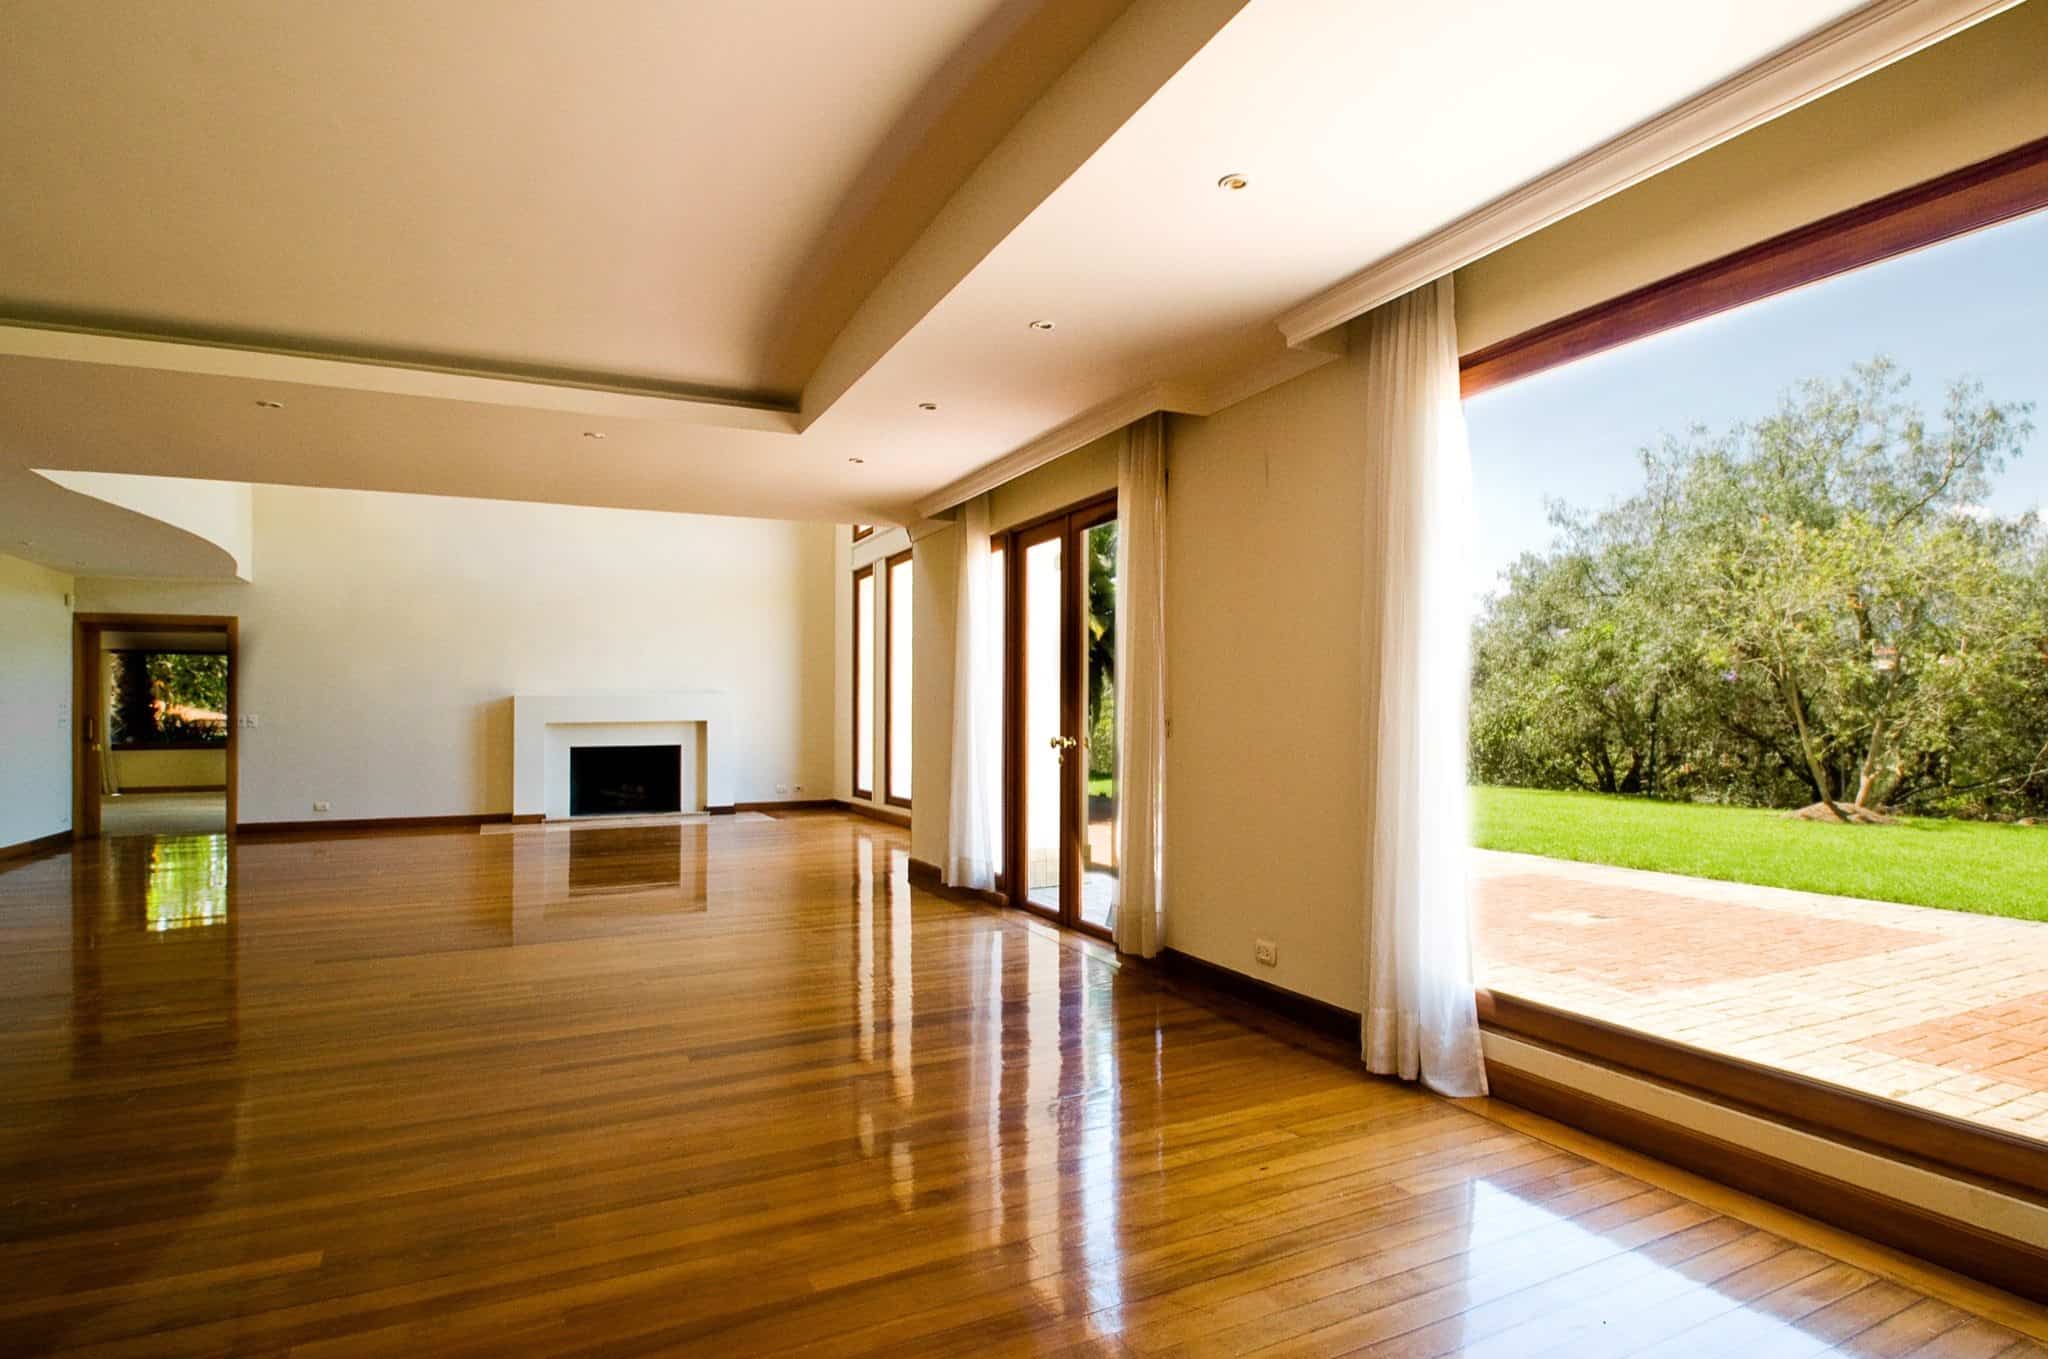 Allow A Professional To Give Your Wood Floors The Perfect Cleaning